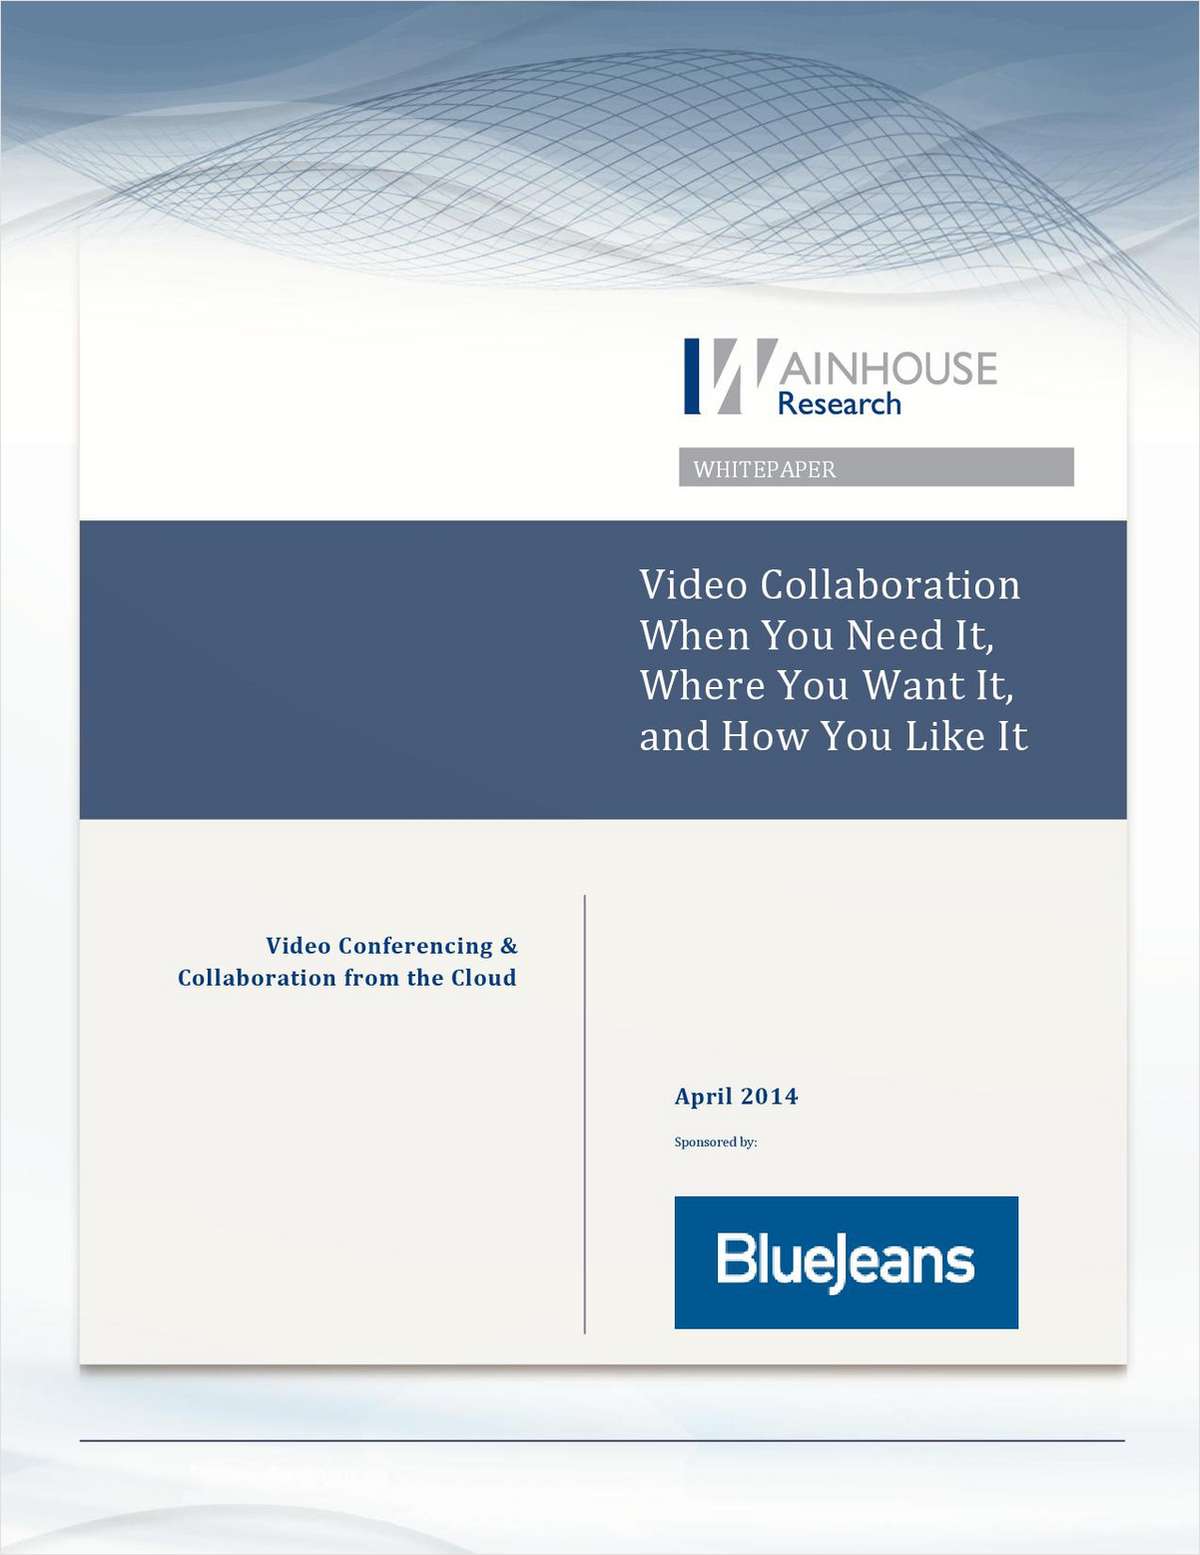 Video Collaboration When You Need It, Where You Want It, and How You Like It